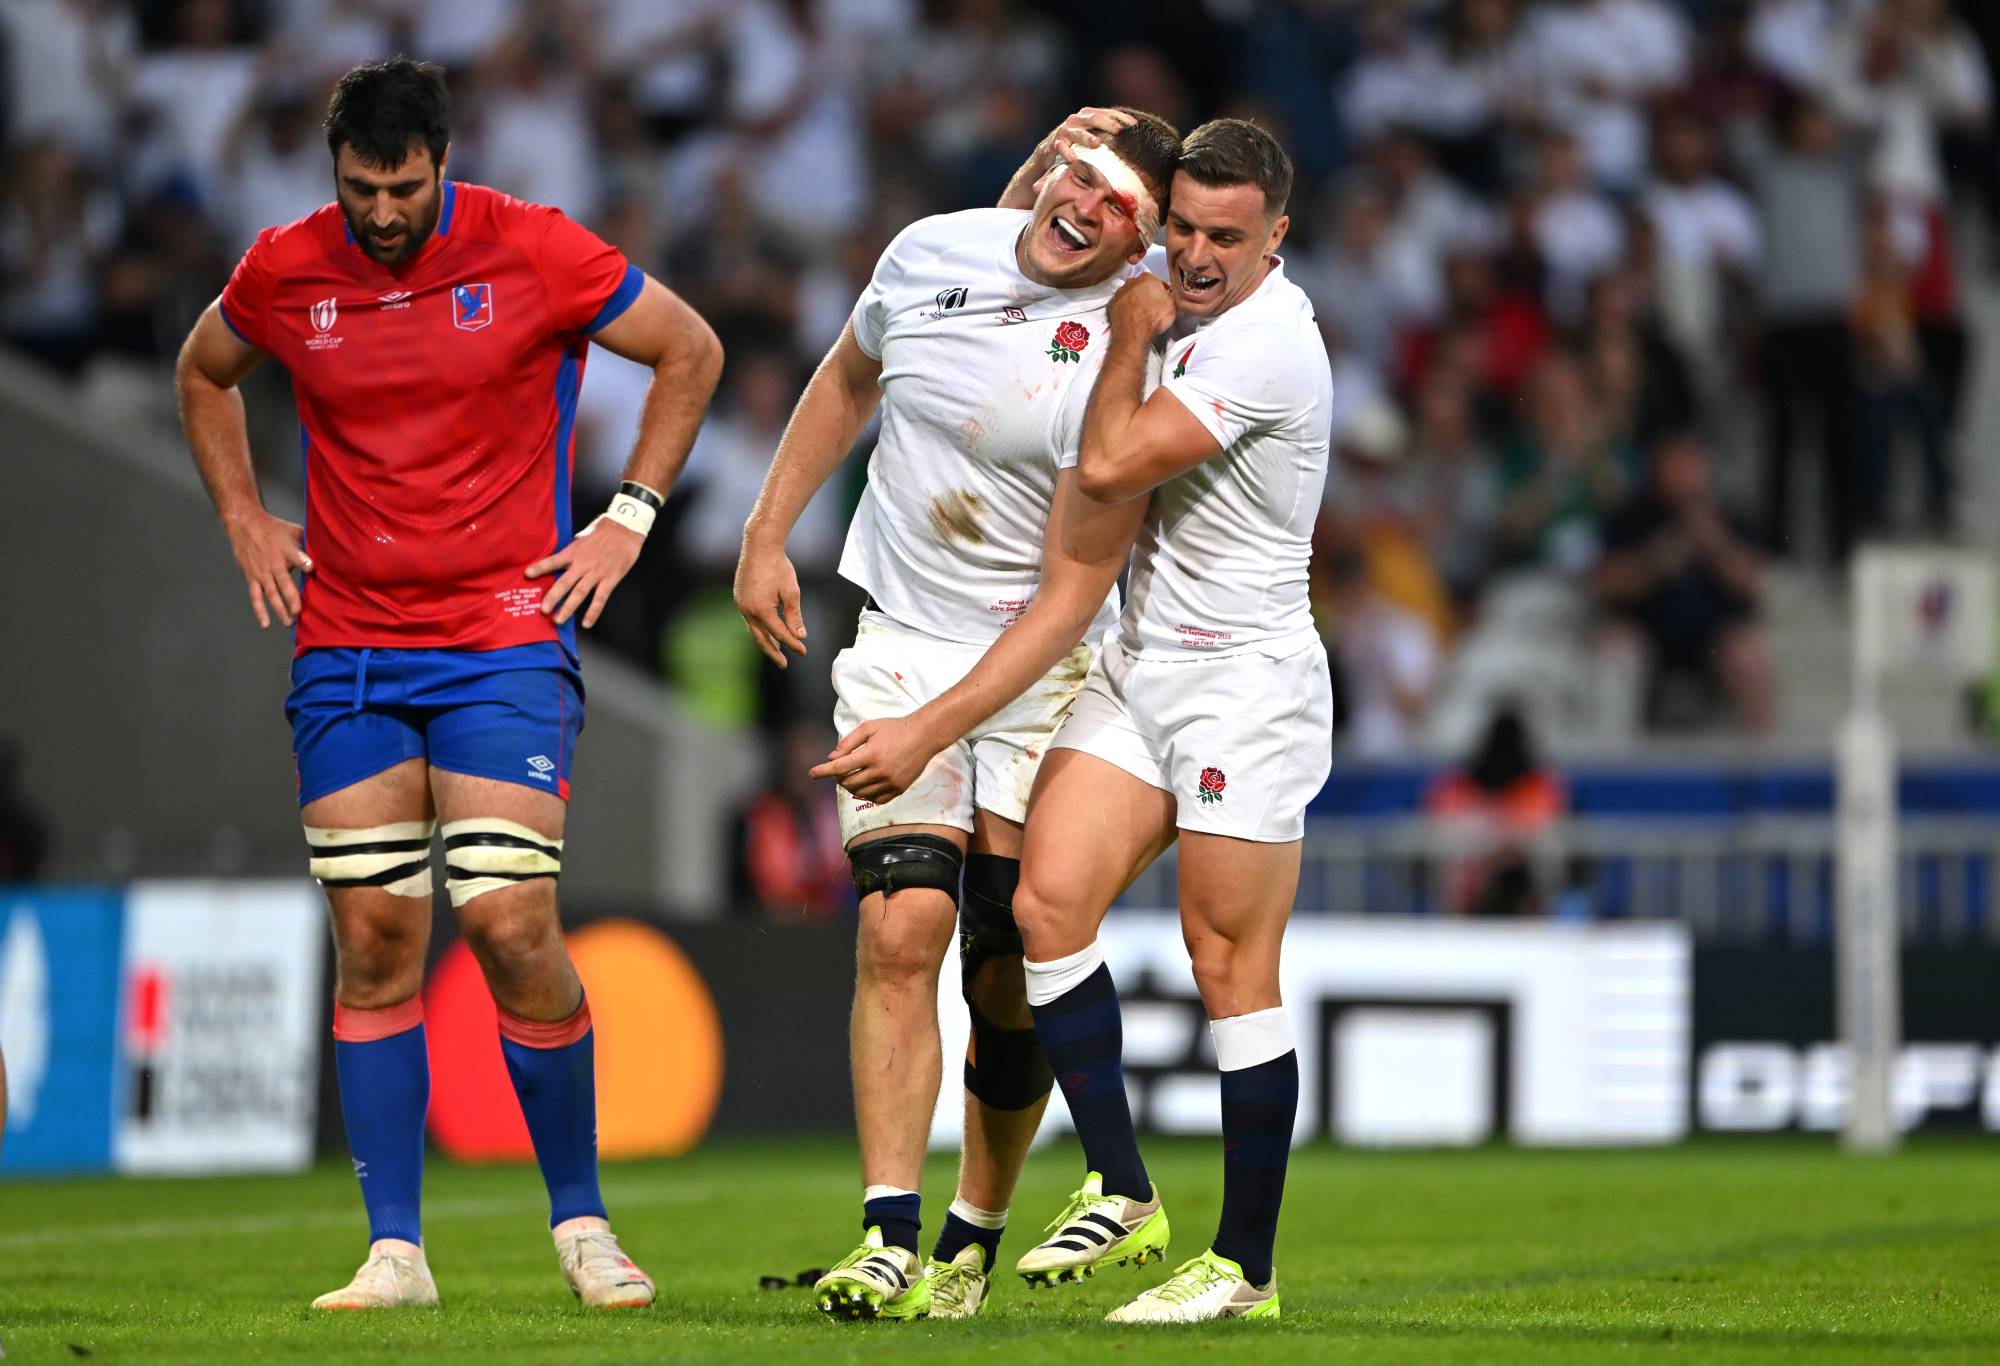  Jack Willis of England celebrates scoring his team's eleventh try with teammate George Ford during the Rugby World Cup France 2023 match between England and Chile at Stade Pierre Mauroy on September 23, 2023 in Lille, France. (Photo by Dan Mullan/Getty Images)